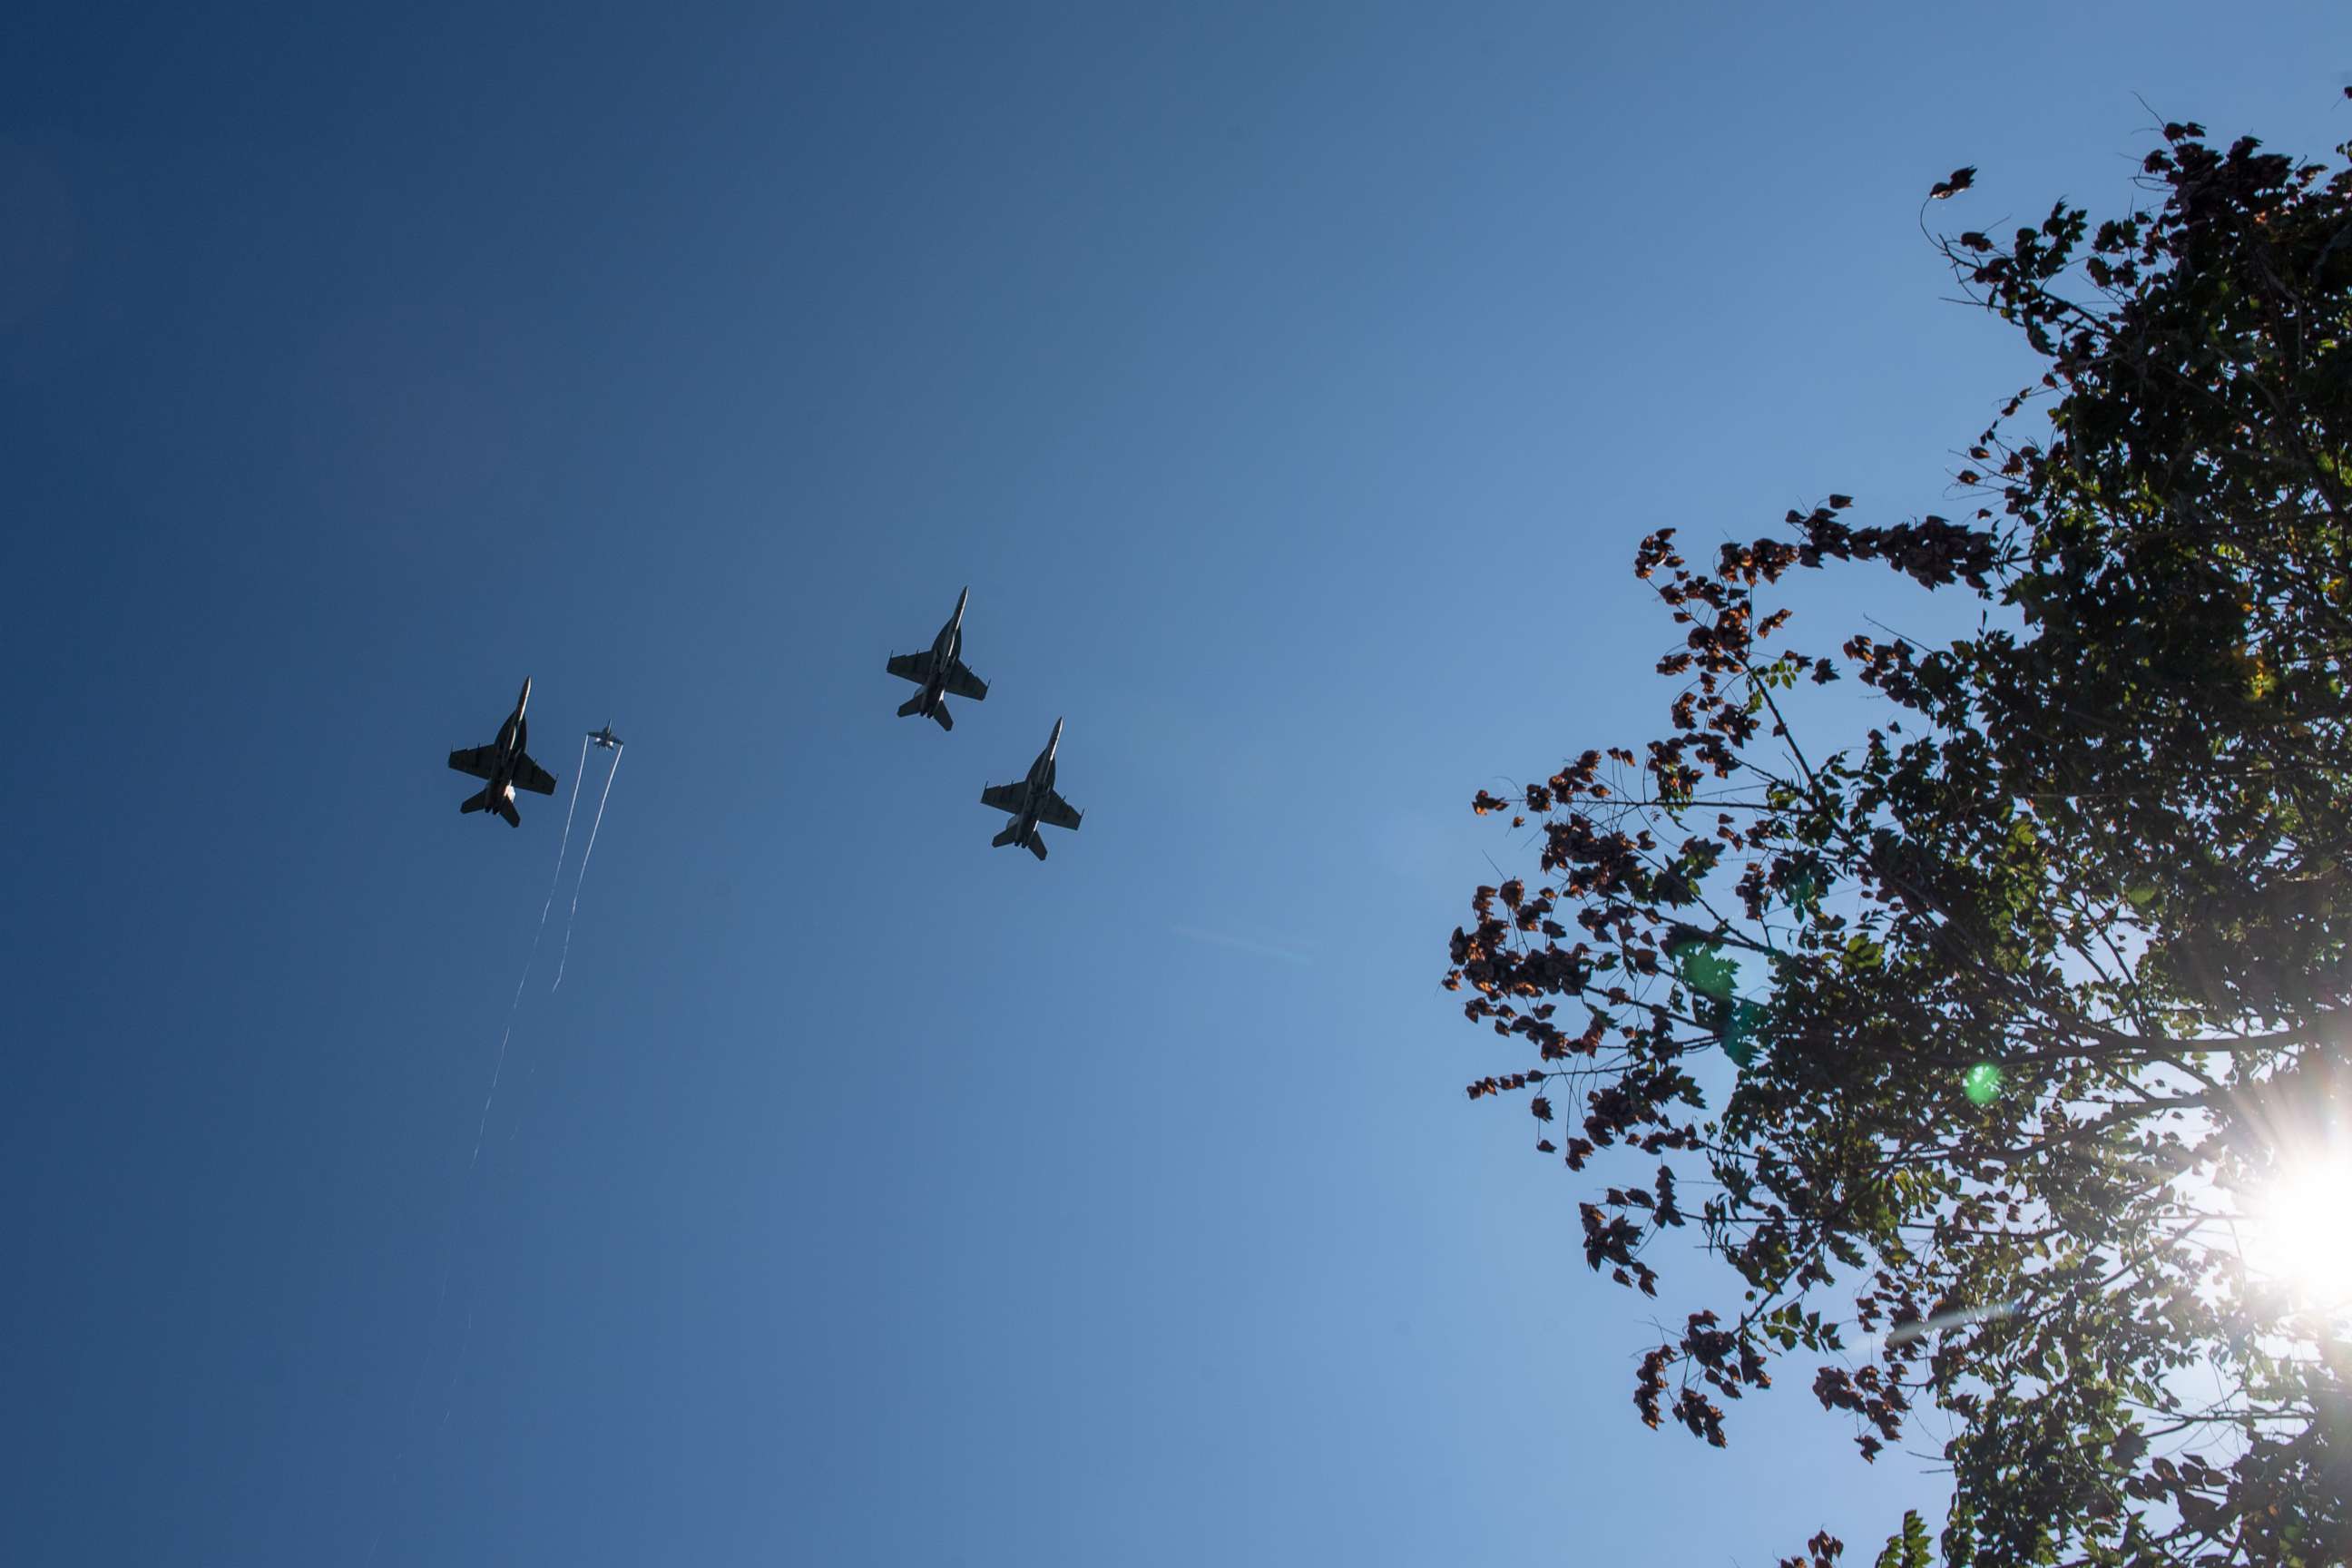 F/A-18 Super Hornets from Strike Fighter Squadrons (VFA) 31, VFA-32, VFA-87 and VFA-105 honor the late Sen. John McCain with a fly-over of the United States Naval Academy during his burial service, Sept. 2, 2018. 